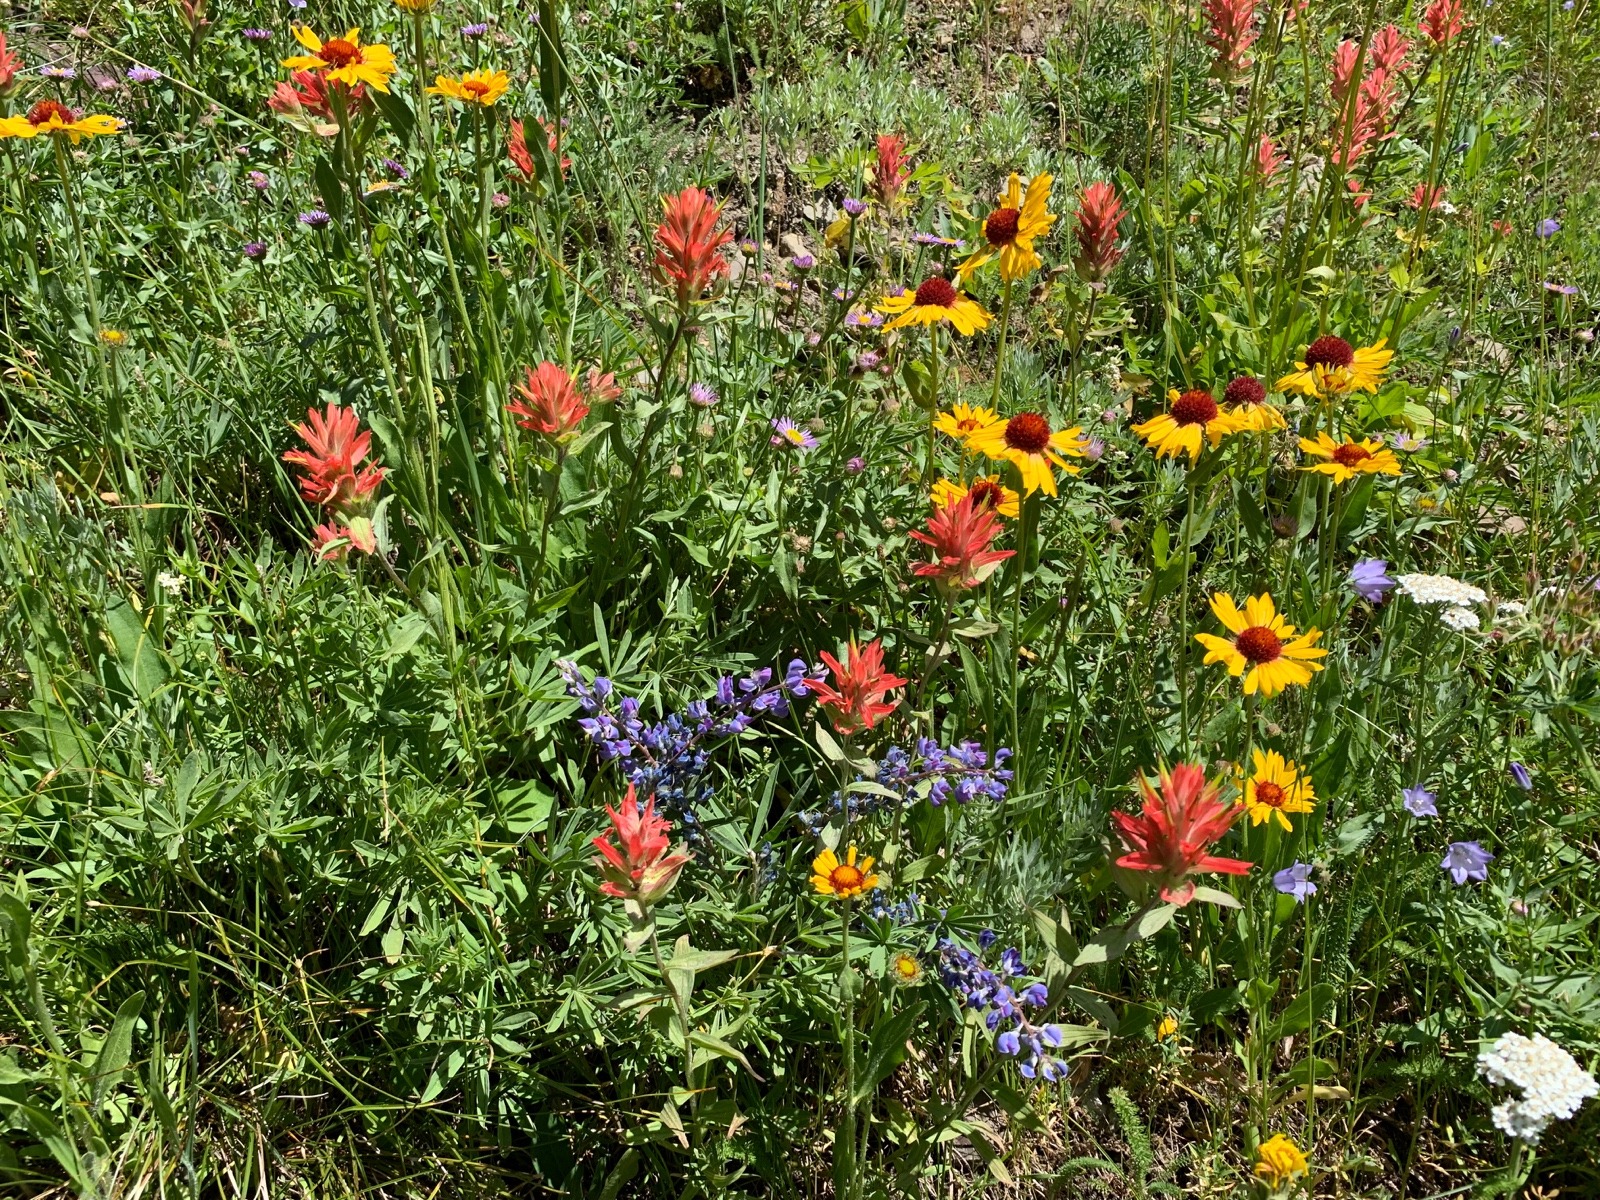 Just a smidgen of summer wildflower diversity in the mountains of Greater Yellowstone. Photo by Todd Wilkinson